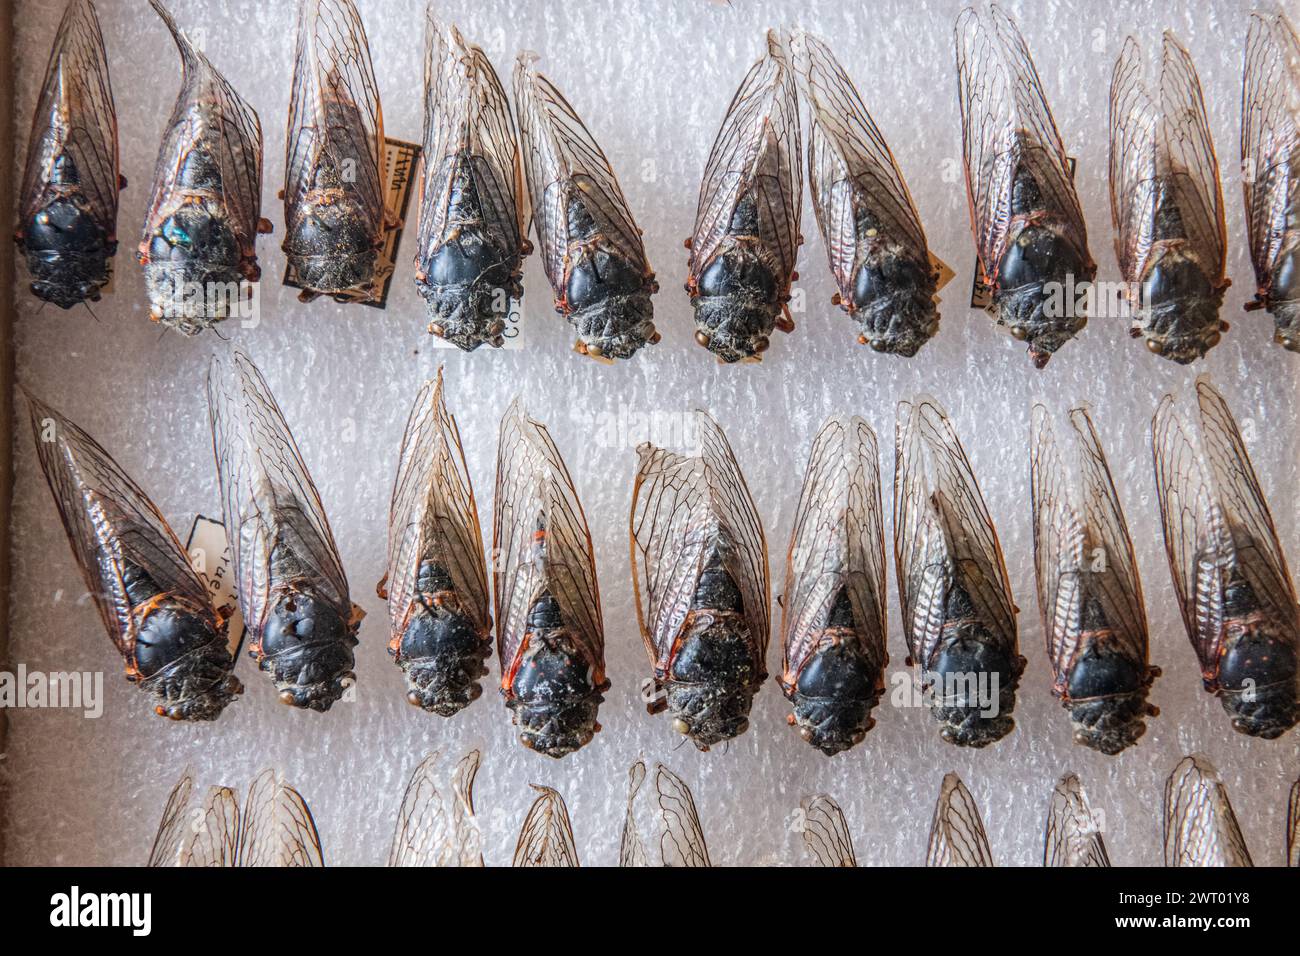 Many pinned cicadas in a museum case showing cicada diversity of North America. Stock Photo